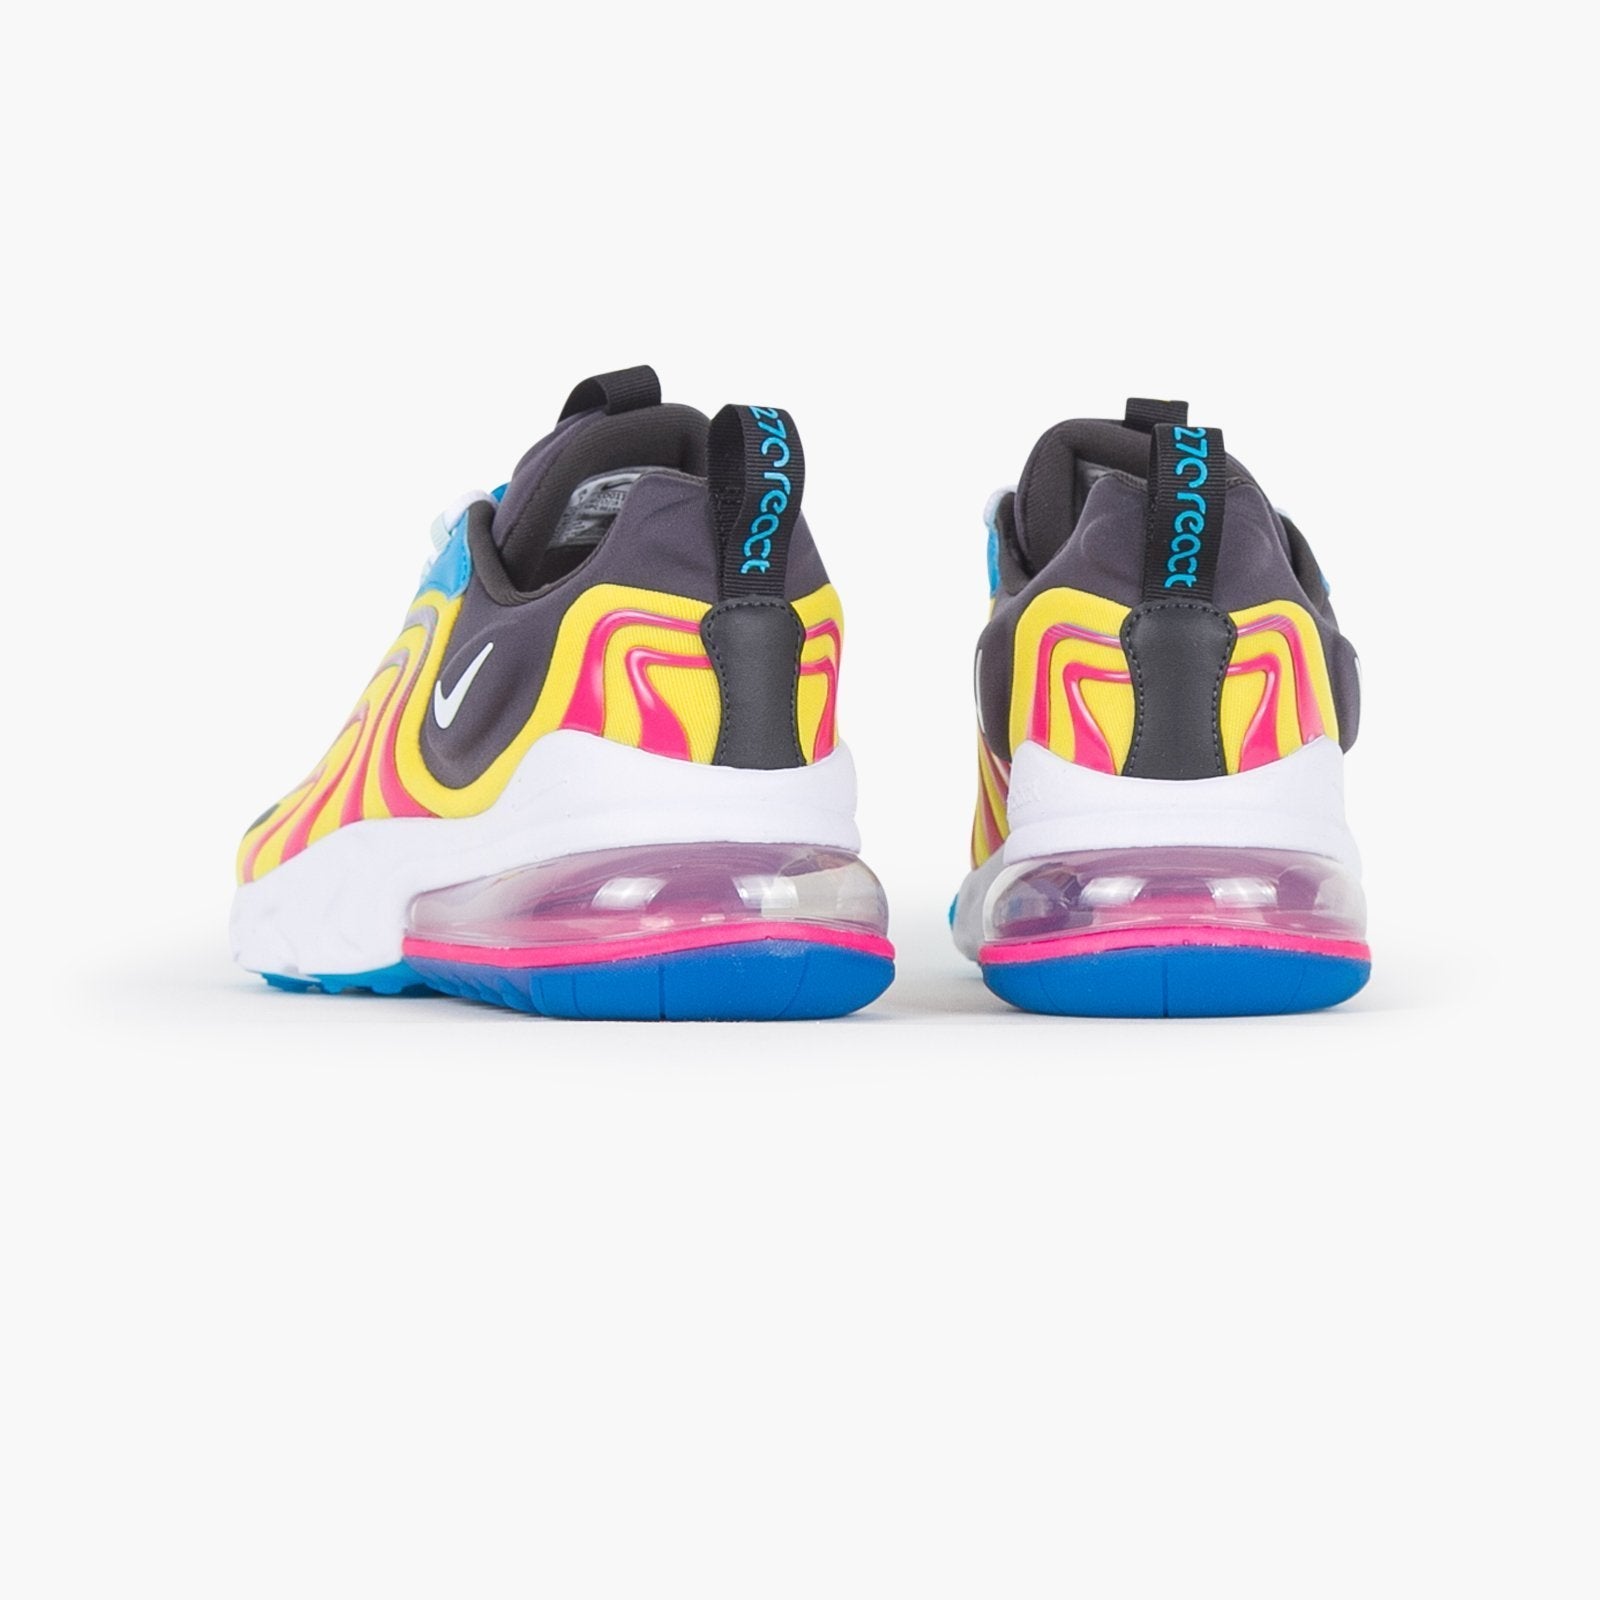 Nike Air Max 270 React ENG-SUEDE Store